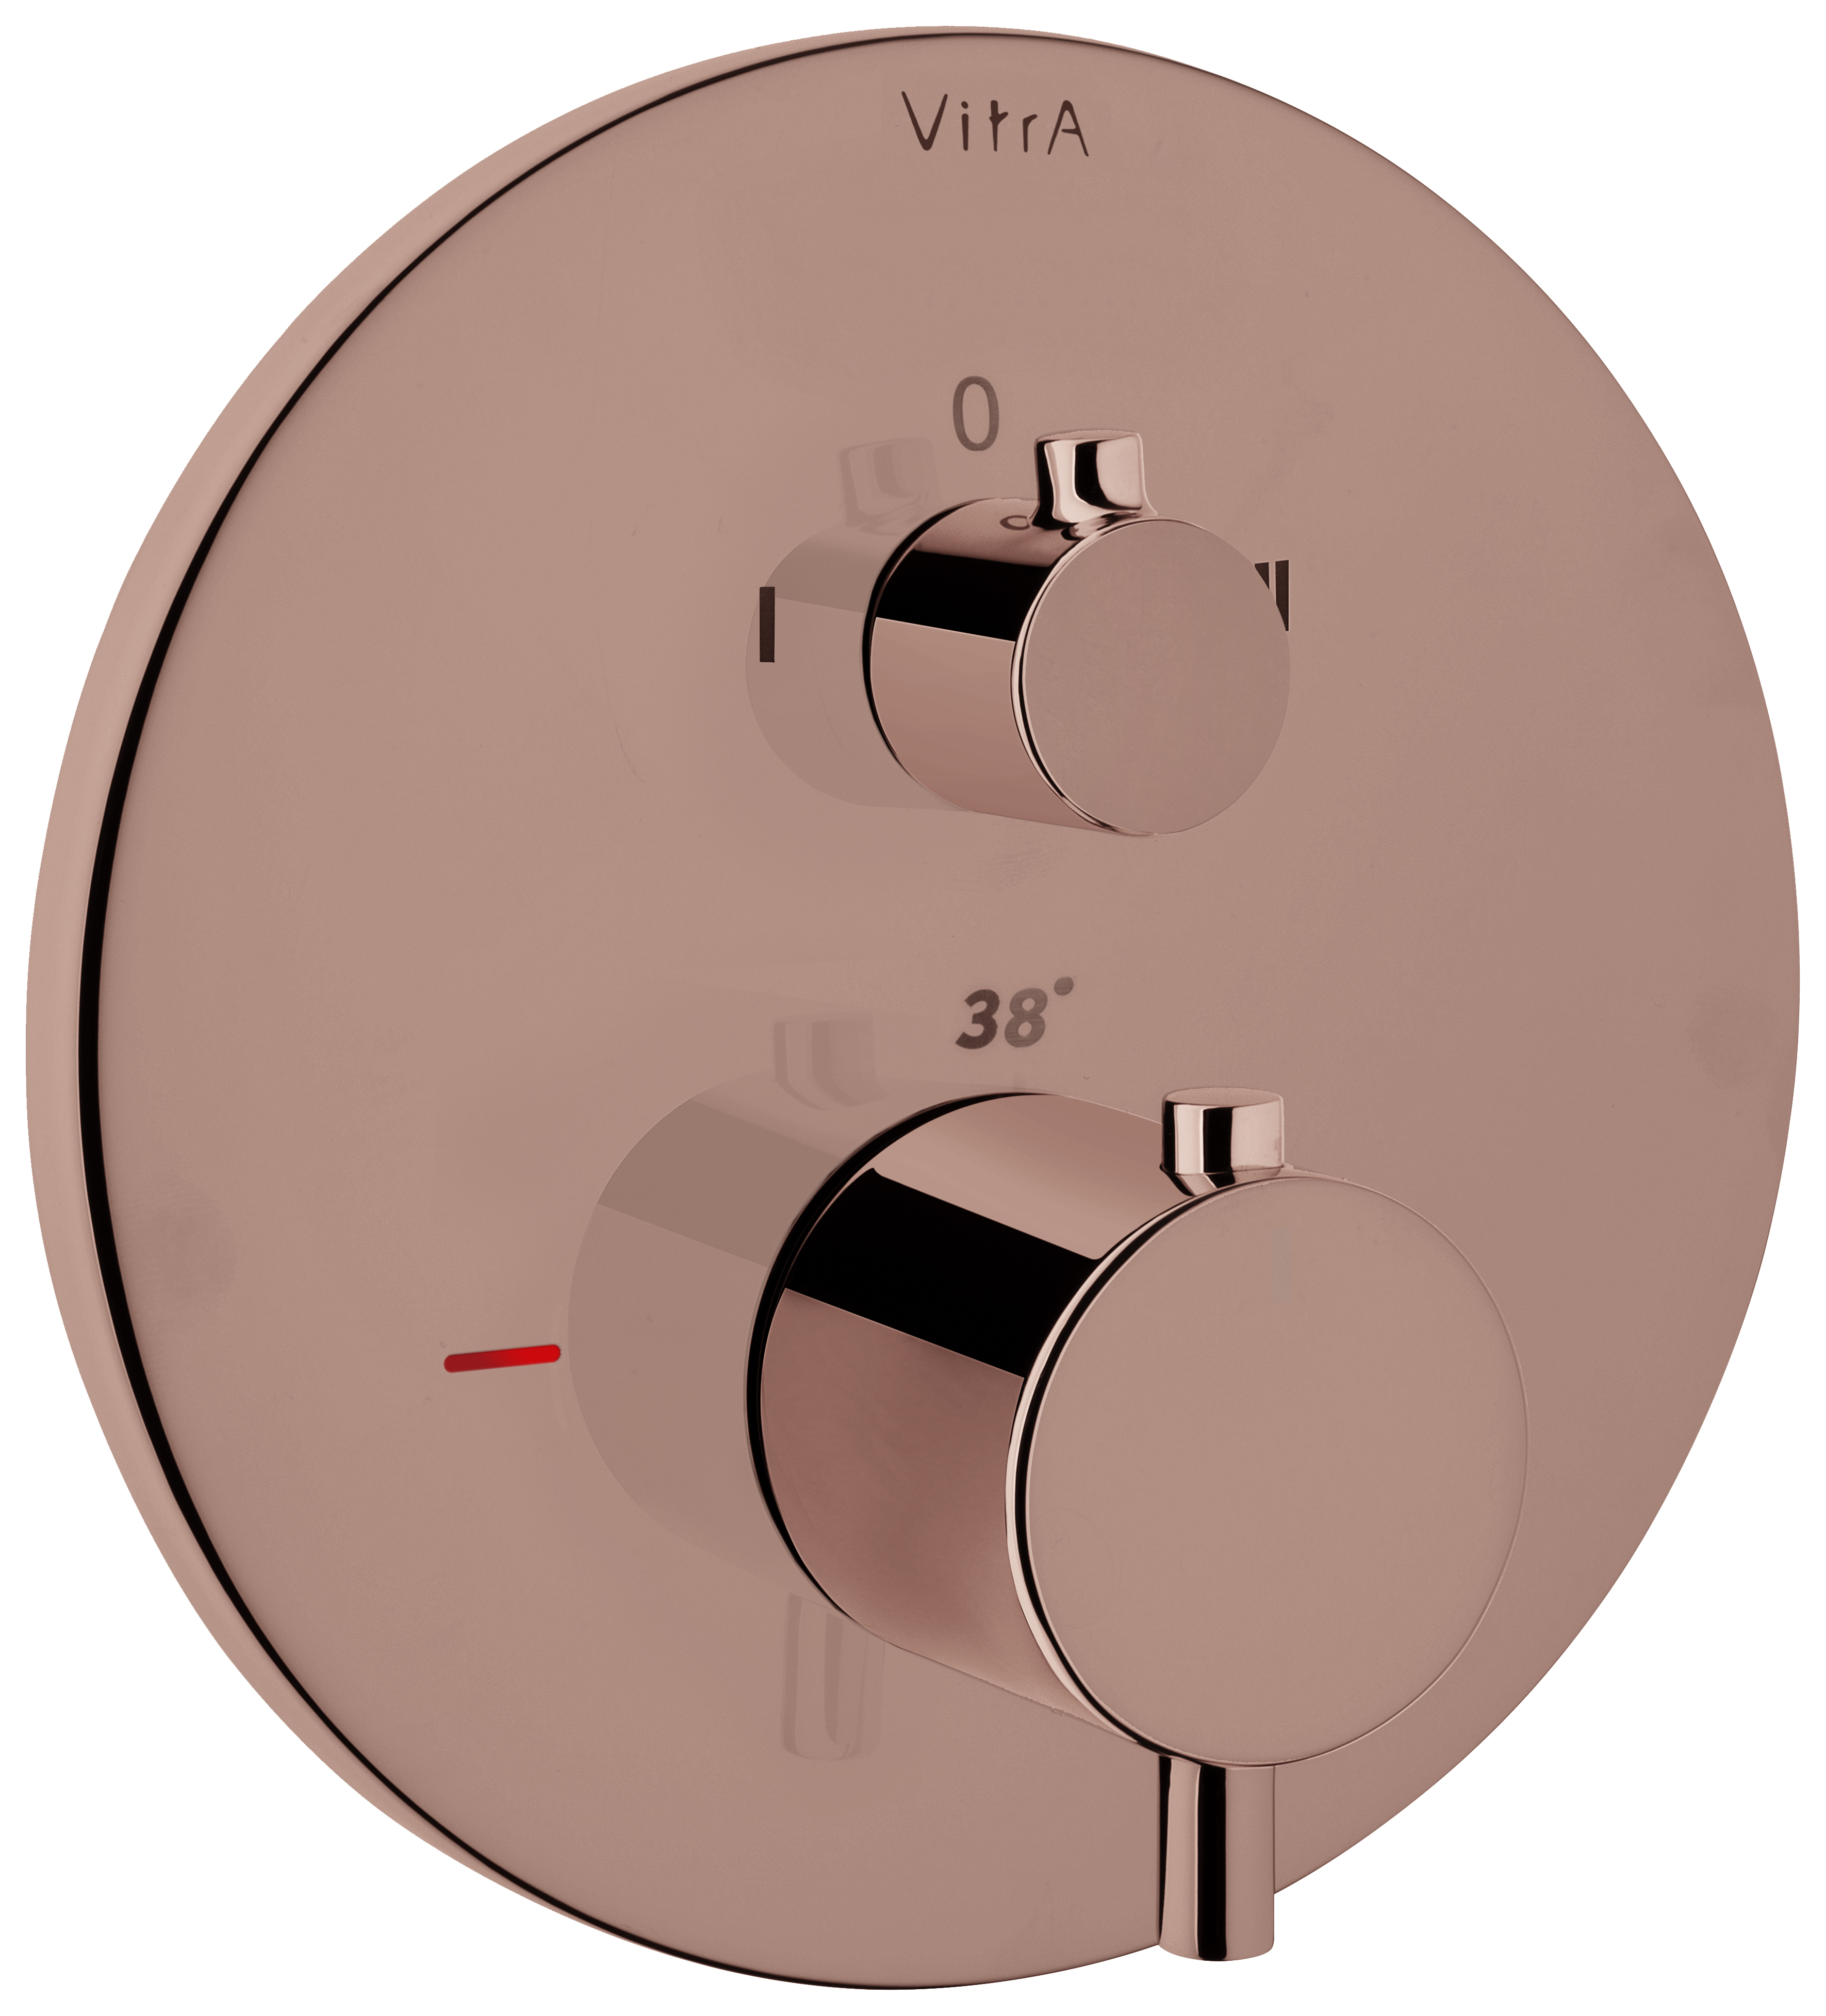 VitrA Origin Round Built-In 2 Way Thermostatic Shower Mixer Valve - Soft Copper